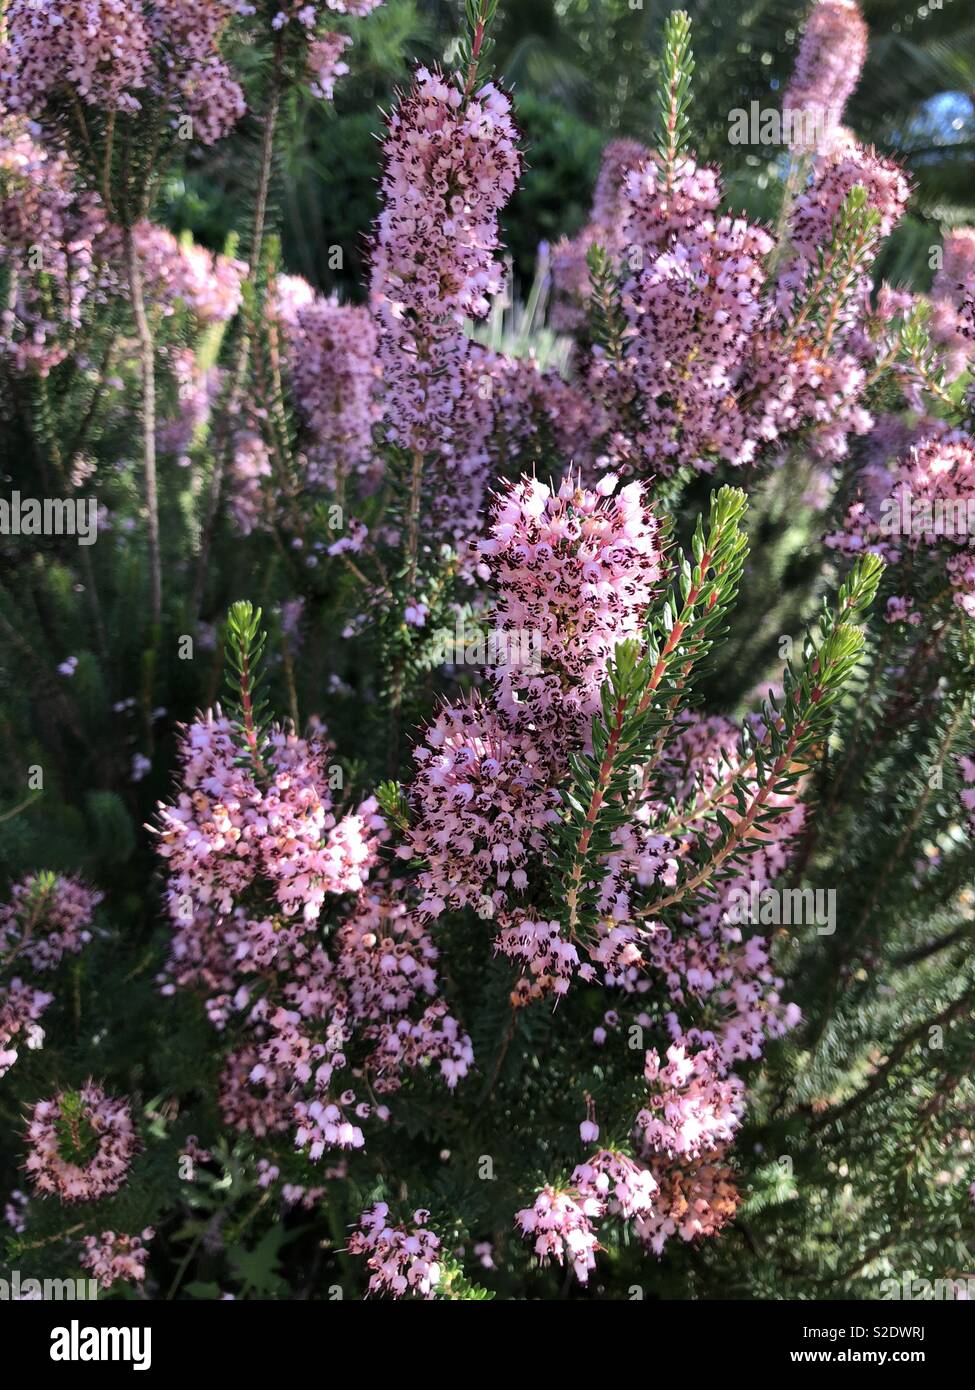 Heather plant with pink flowers Stock Photo